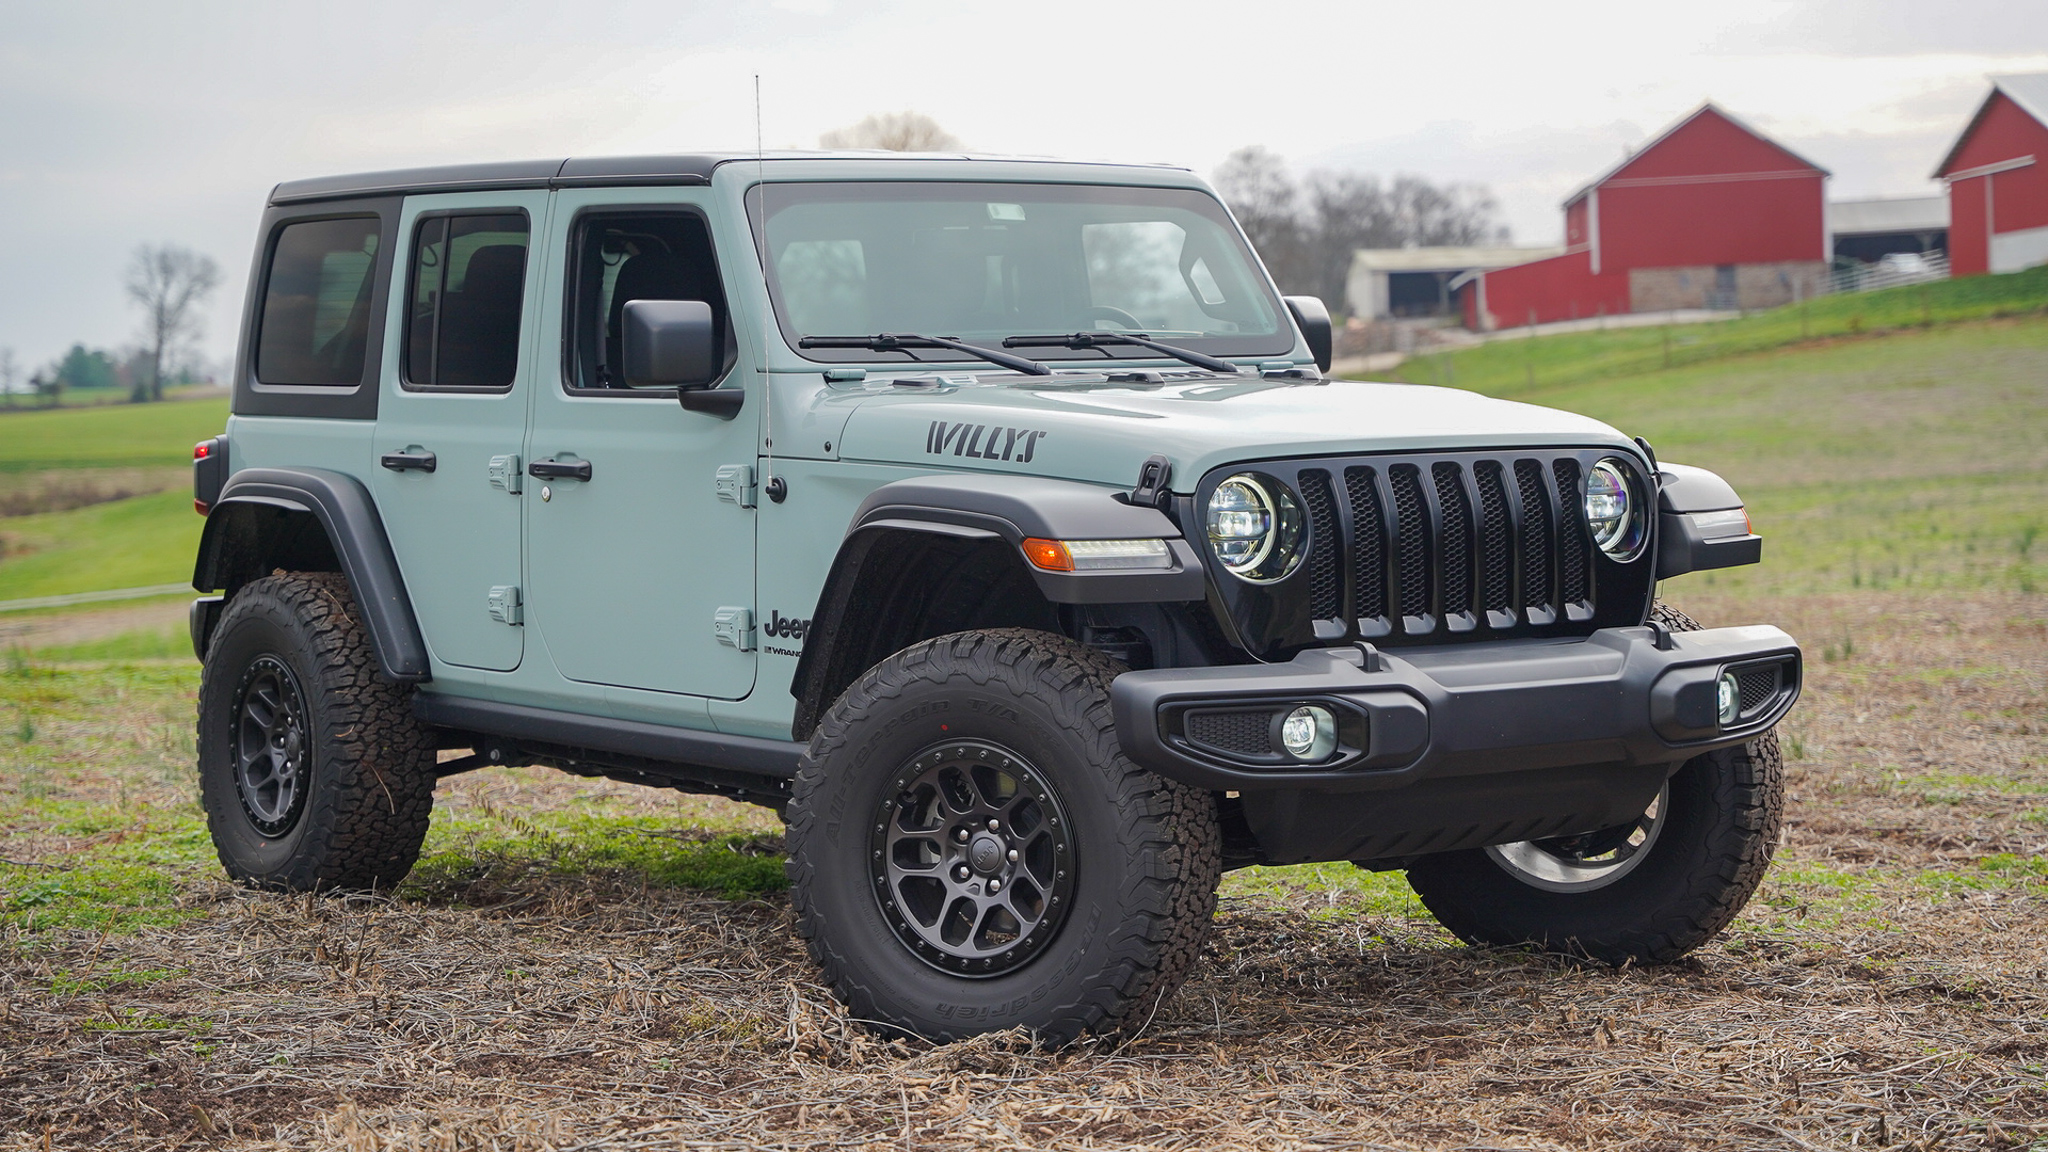 Car Review: Wrangler Willys 4-door is made for off-road and more